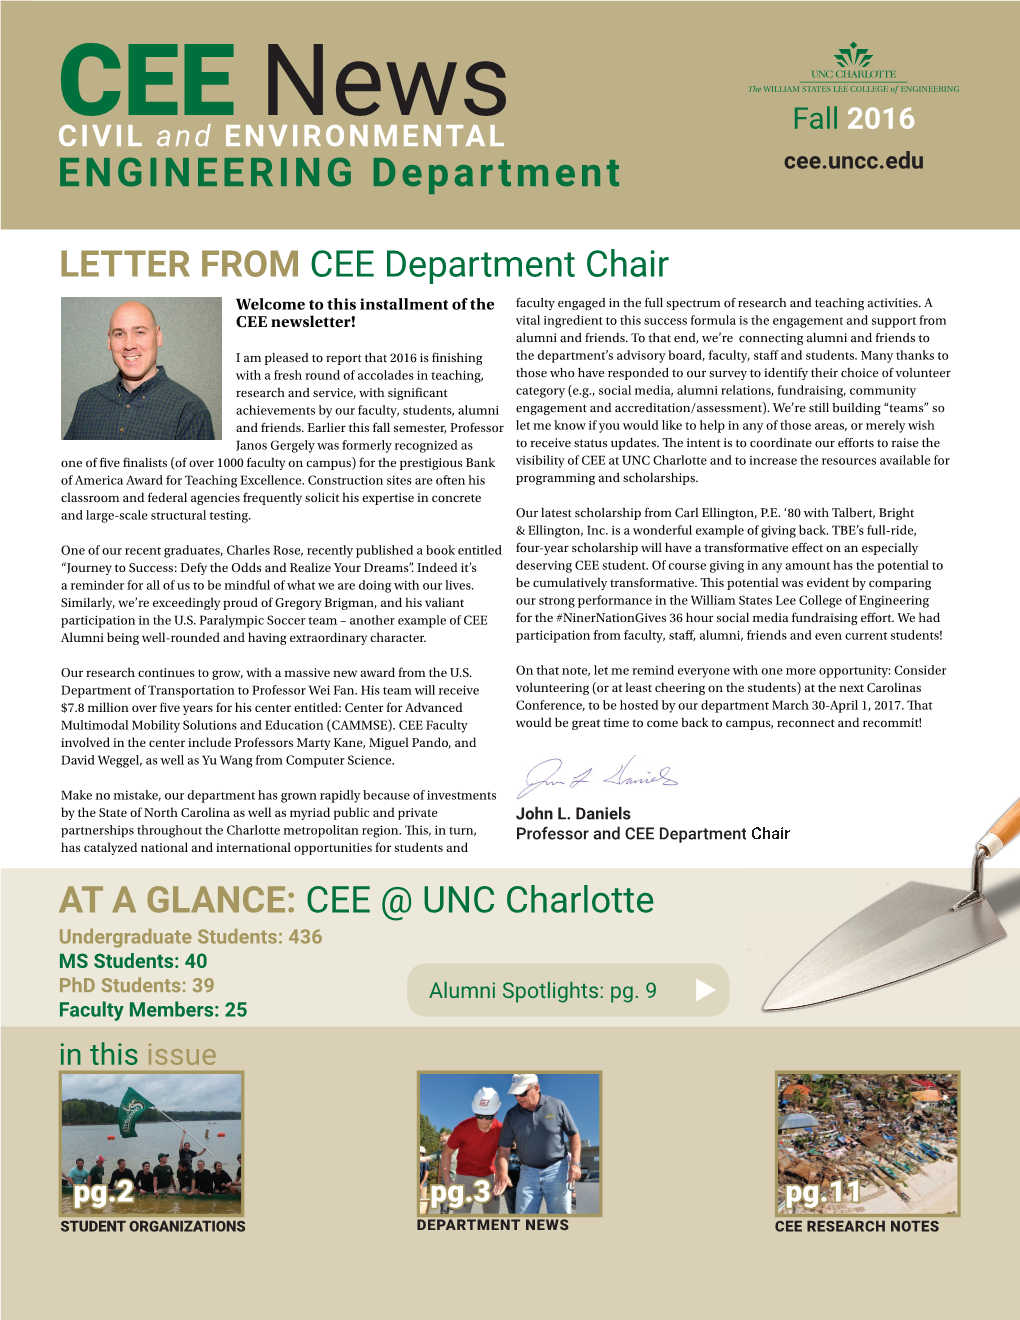 CEE Newsletter! Vital Ingredient to This Success Formula Is the Engagement and Support from Alumni and Friends